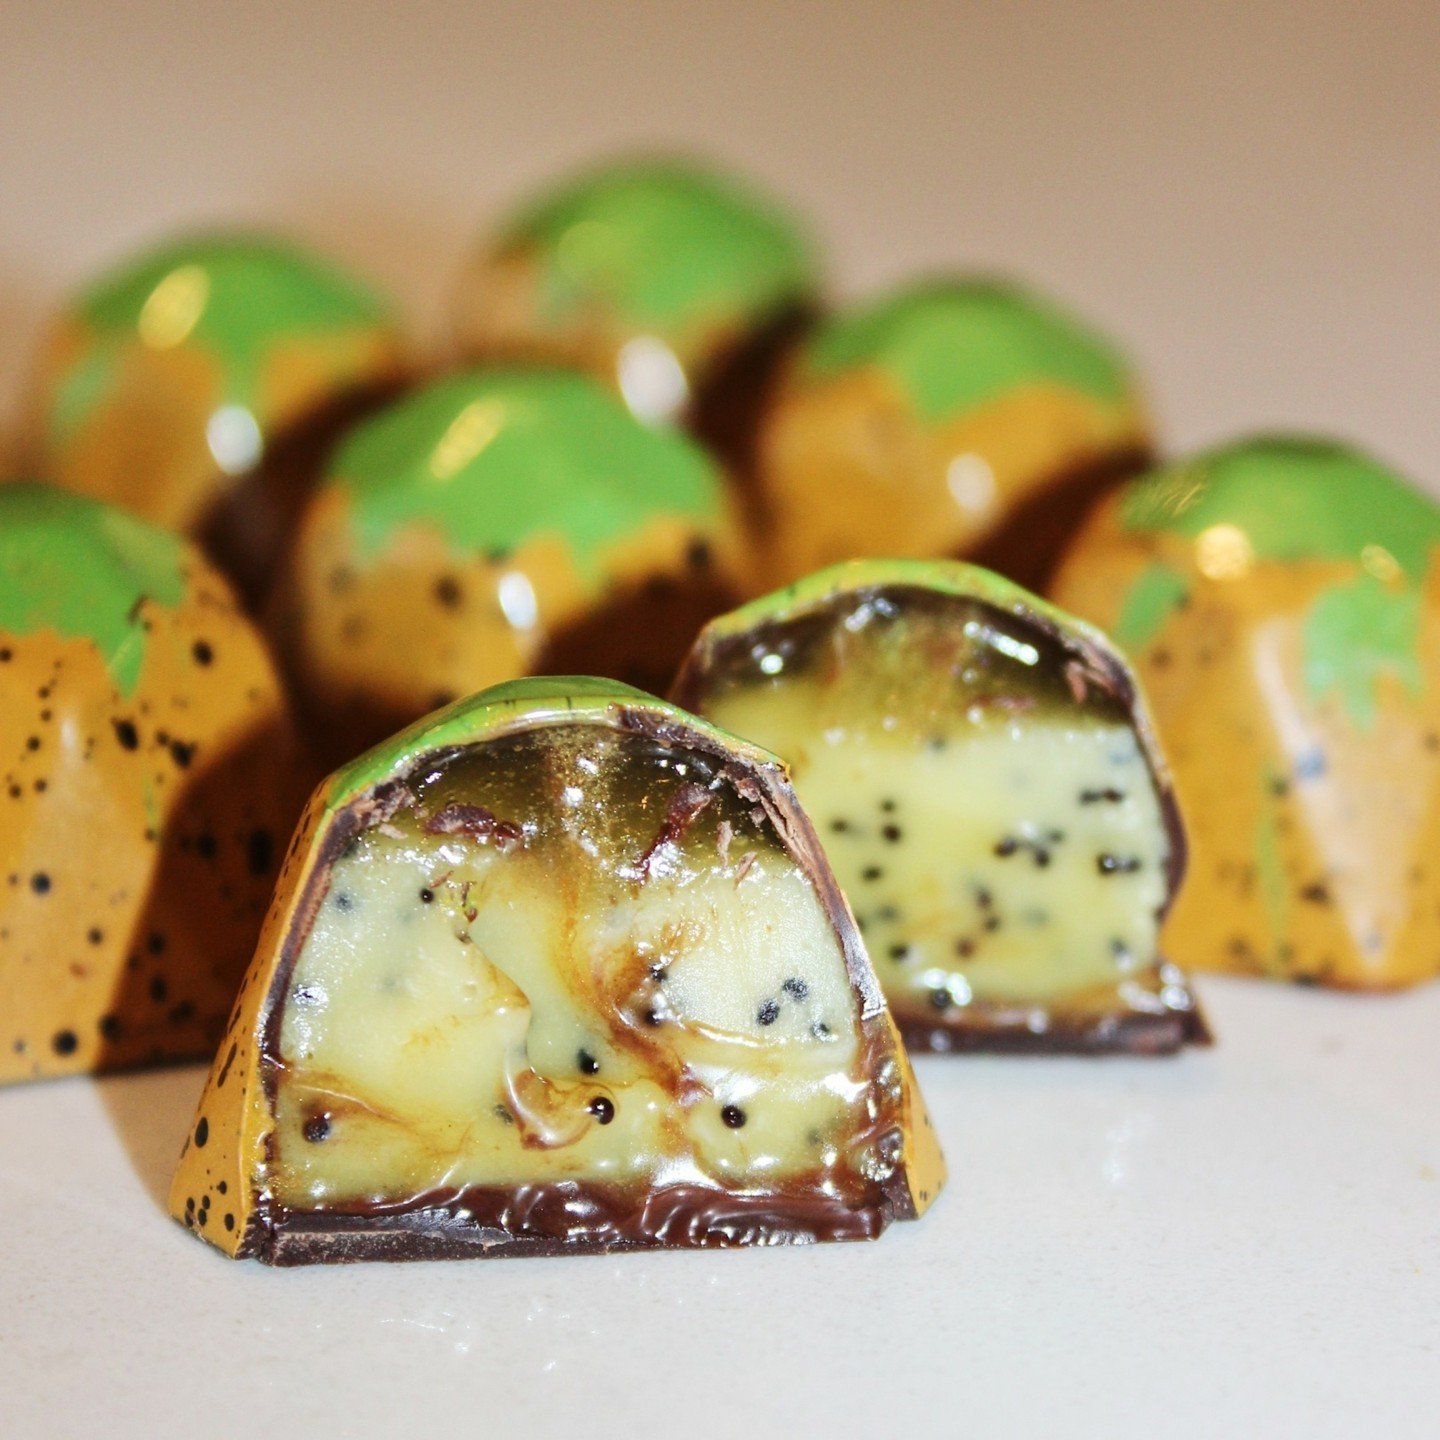 Happy Sunday! End the weekend with a Pineapple Poppy Passion bonbon today!🍍 

*
*
*
*
*
#sweets #adamtyoungconfections #siftmystic #pastrychef #bonbons #bonbon #atyconfections #chocolatebonbons #chocolatier #handcrafted #artisanchocolate #giftbox #s